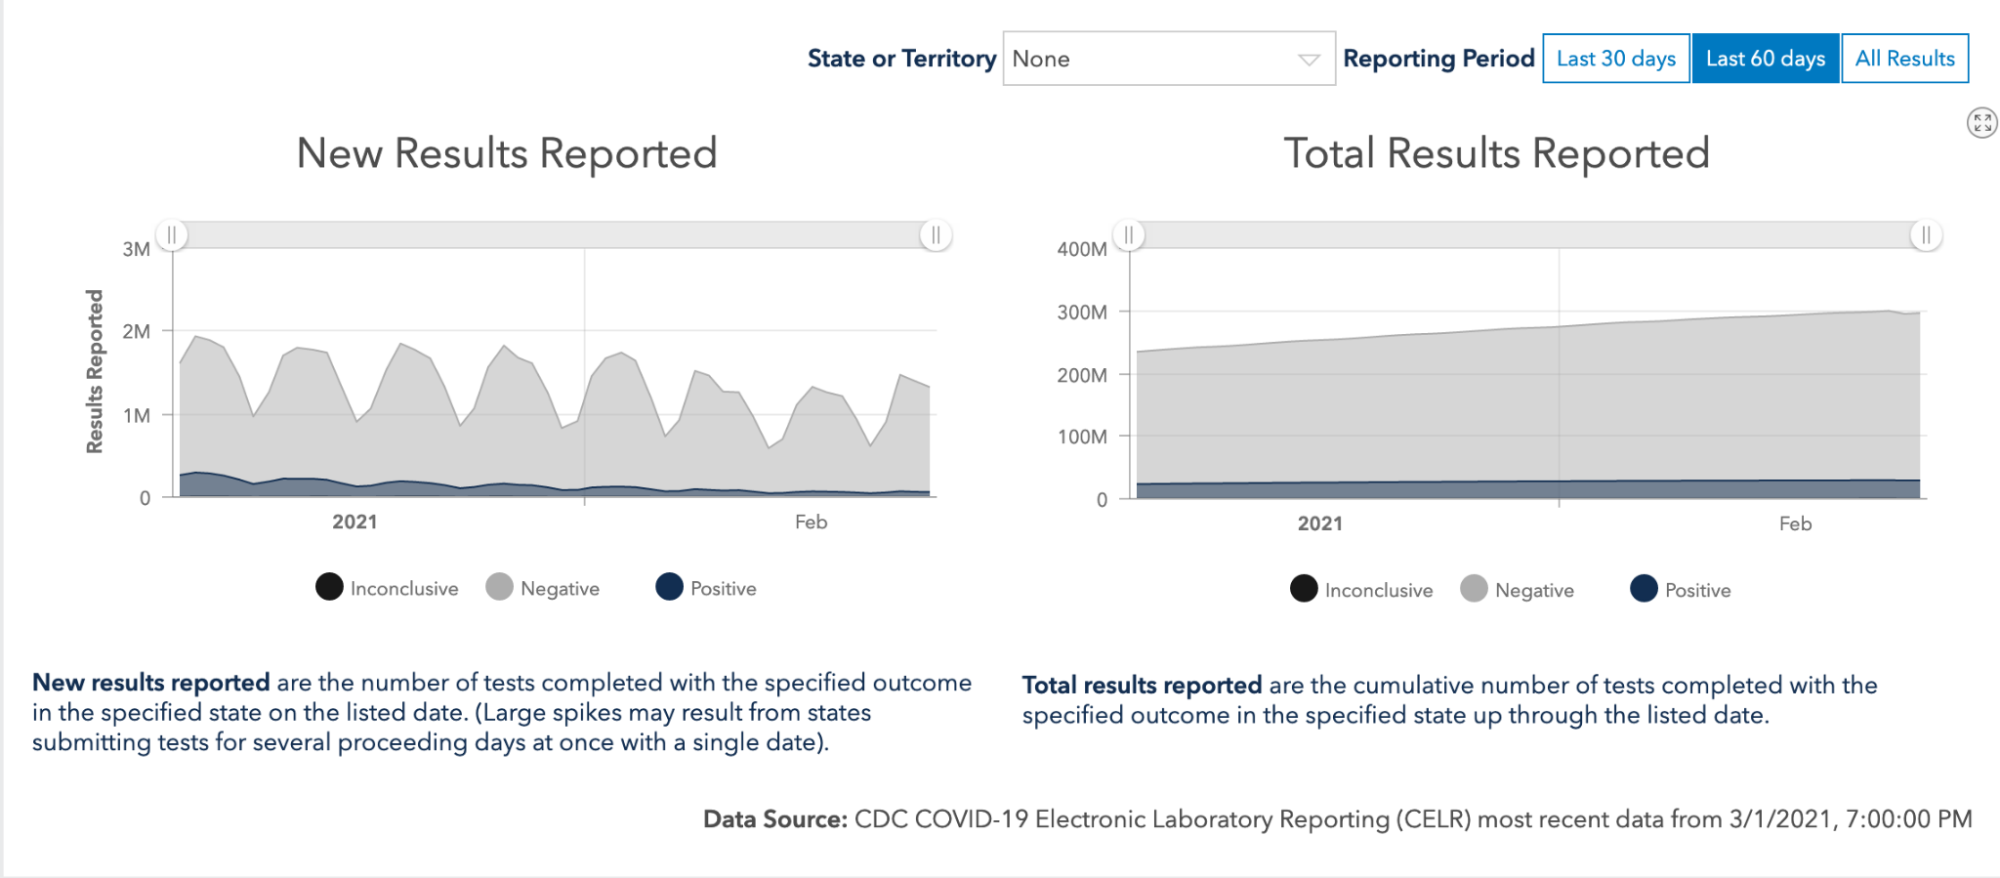 Two graphs showing US COVID-19 inconclusive, negative, and positive test results over time for the last 60 days, covering January and February 2021. The graph on the left shows new test results reported and shows significant peaks and valleys over time ranging between about 2 million and 1 million new tests per day. The graph on the right shows a slight increase over time, beginning at about 225 million total test results reported and peaking at about 300 million total tests reported.